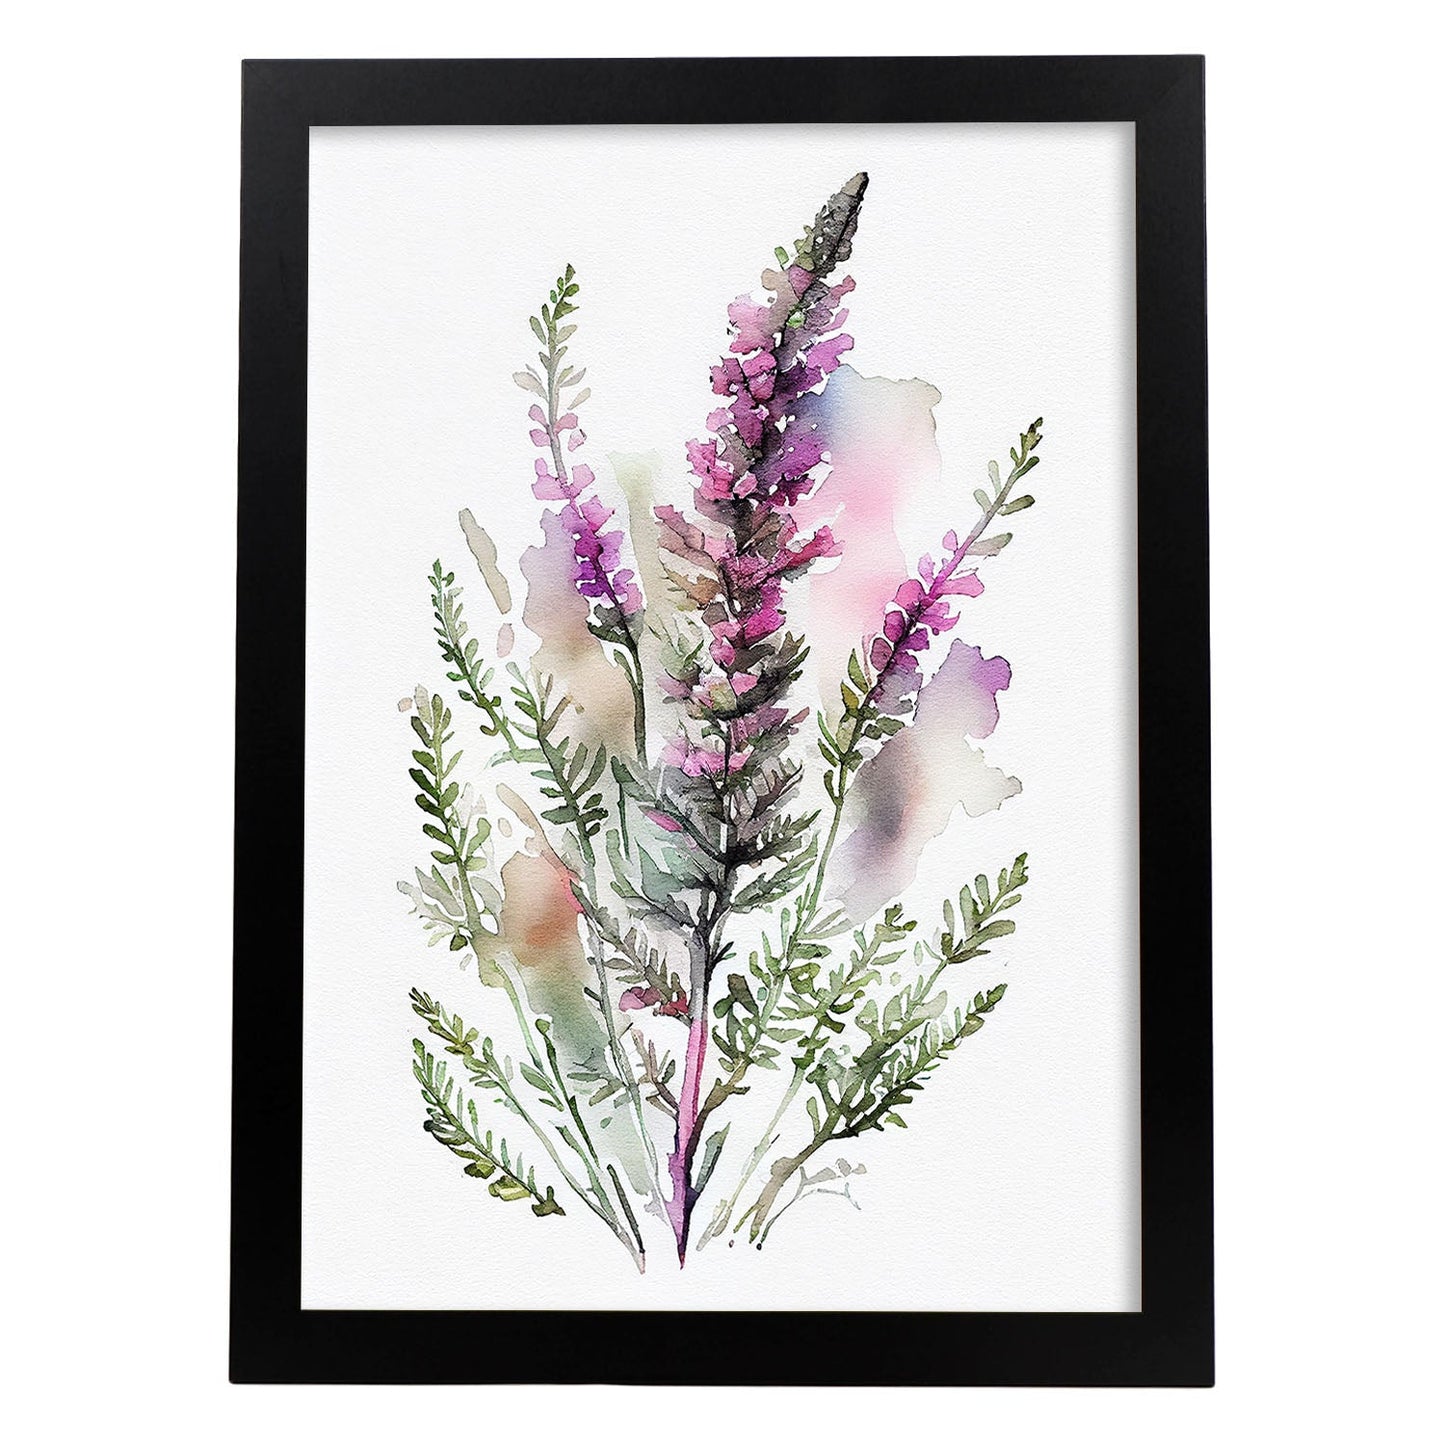 Nacnic watercolor minmal Heather_2. Aesthetic Wall Art Prints for Bedroom or Living Room Design.